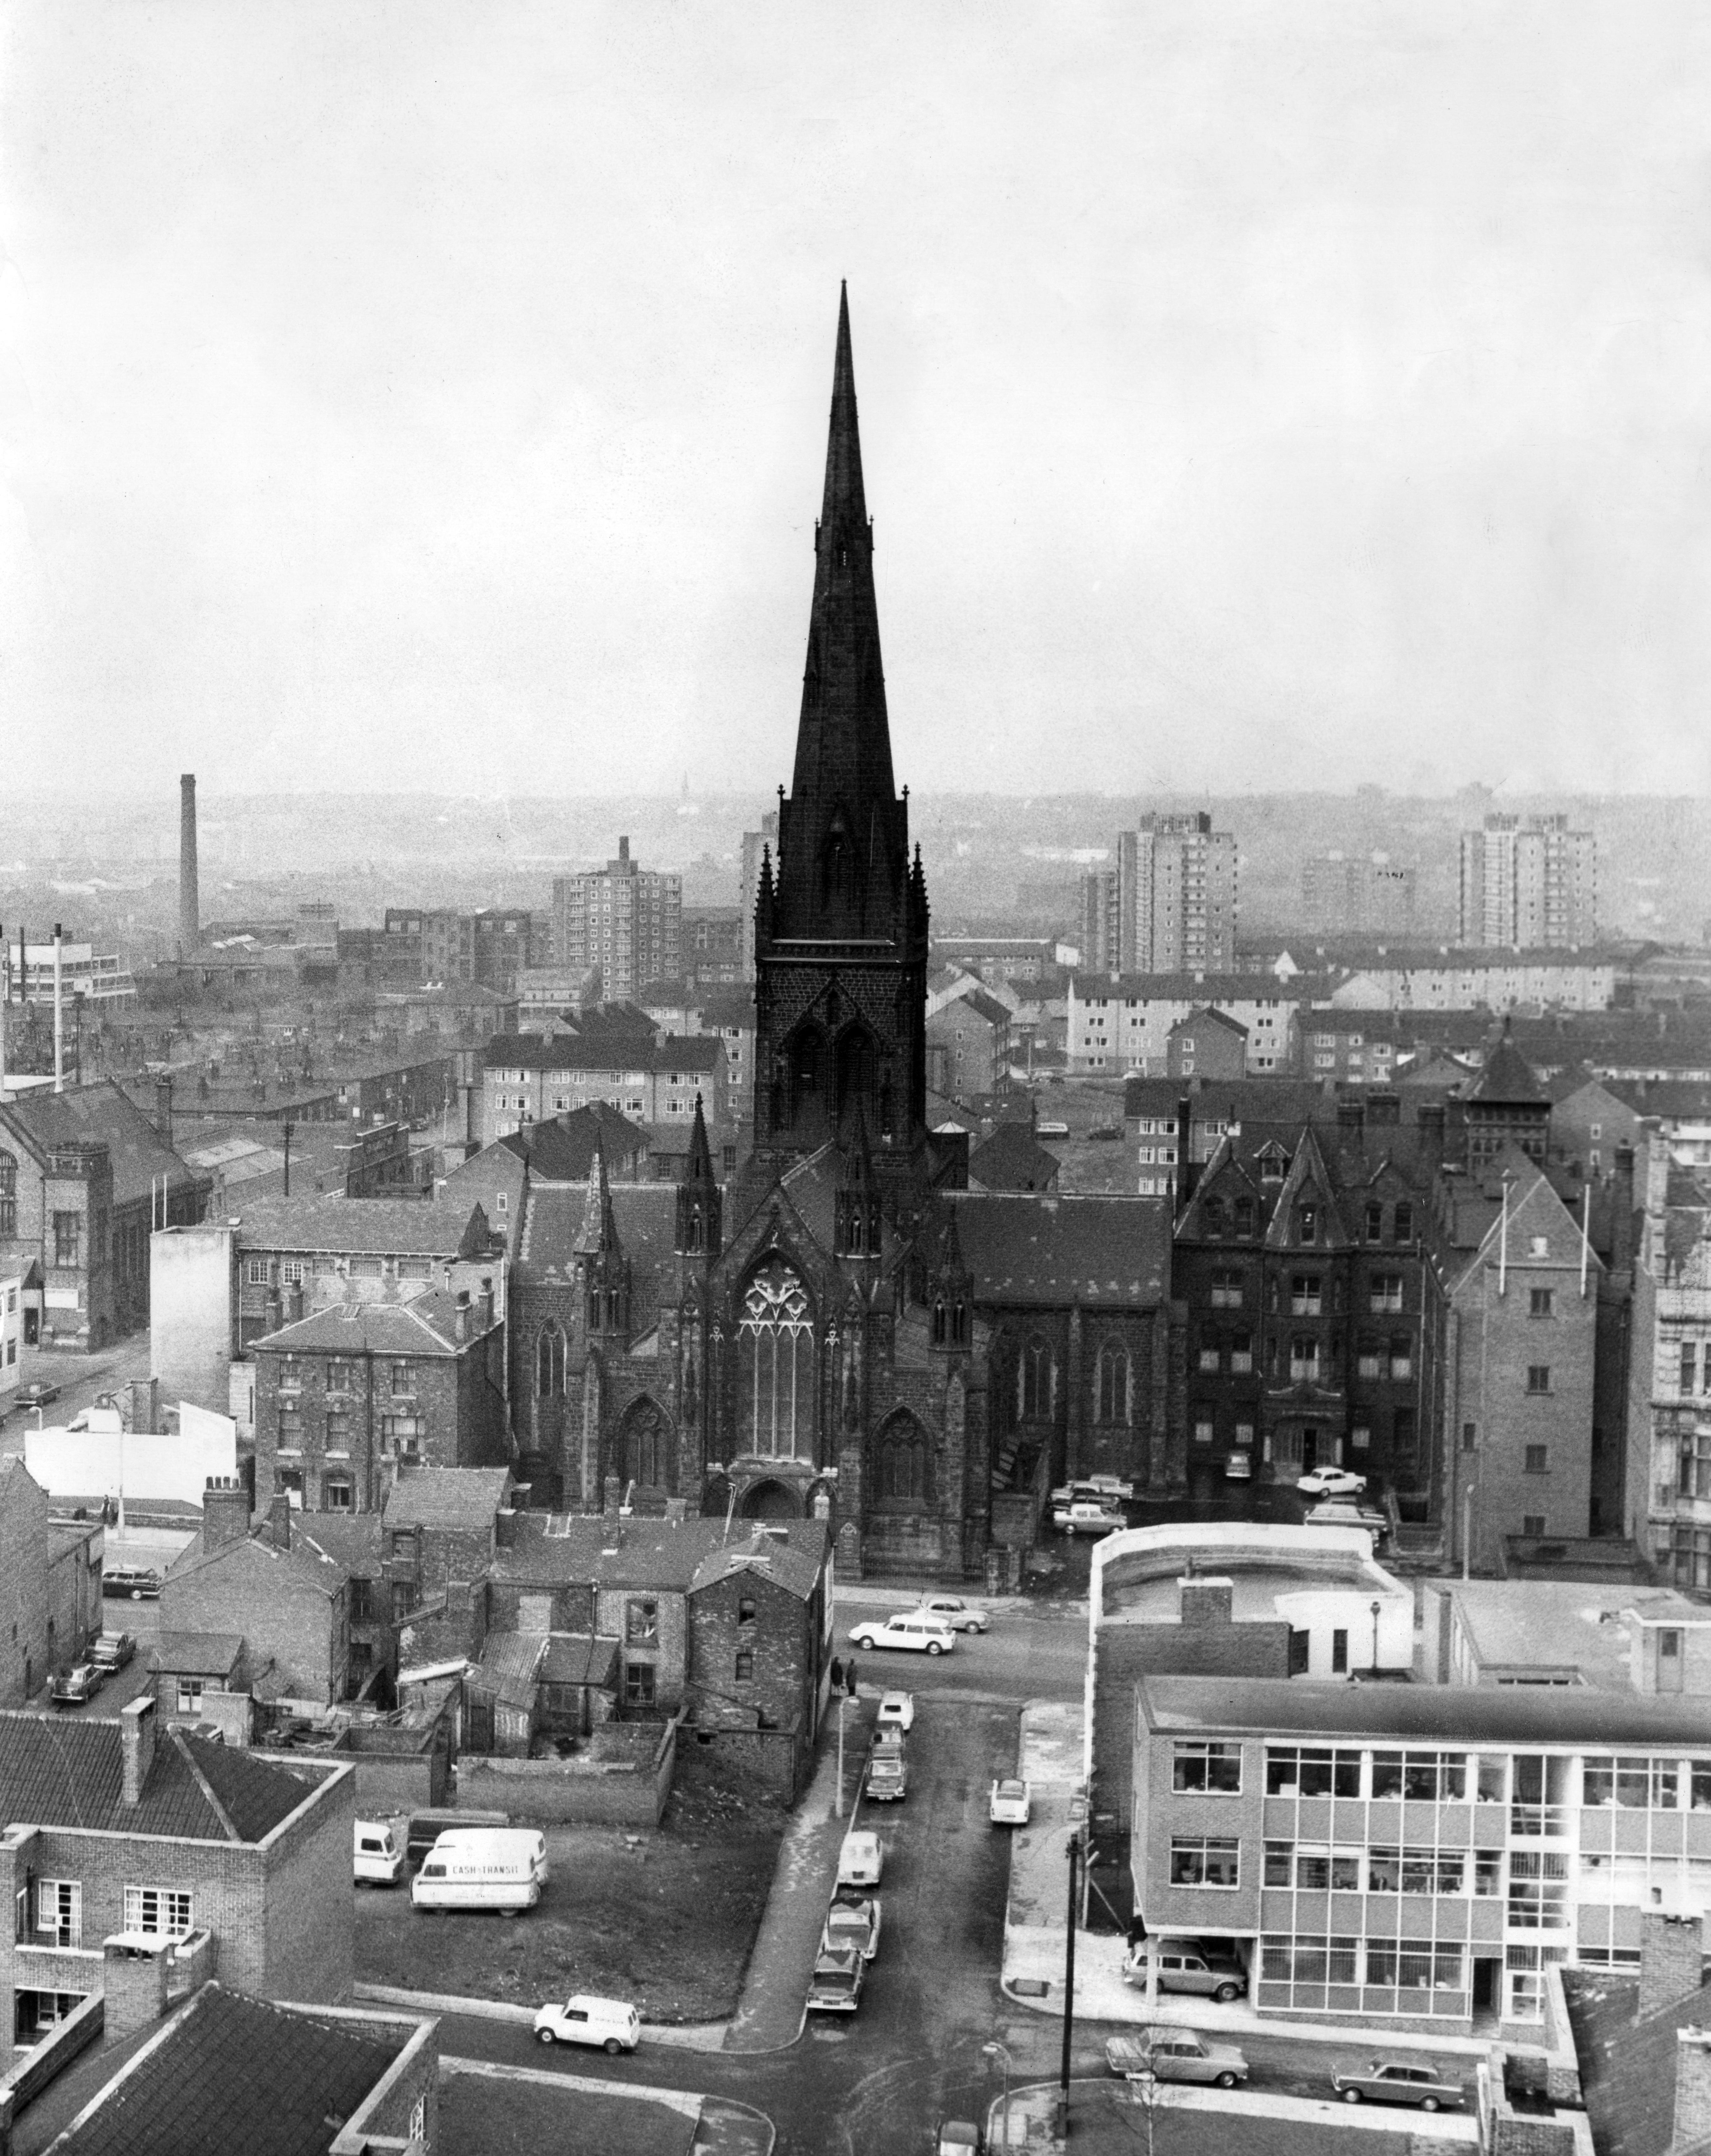 A Photo of Salford Cathedral, Manchester. 24th June 1967. The Cathedral Church of St. John the Evangelist, usually known as Salford Cathedral, is a Roman Catholic cathedral in the City of Salford in Greater Manchester, England.